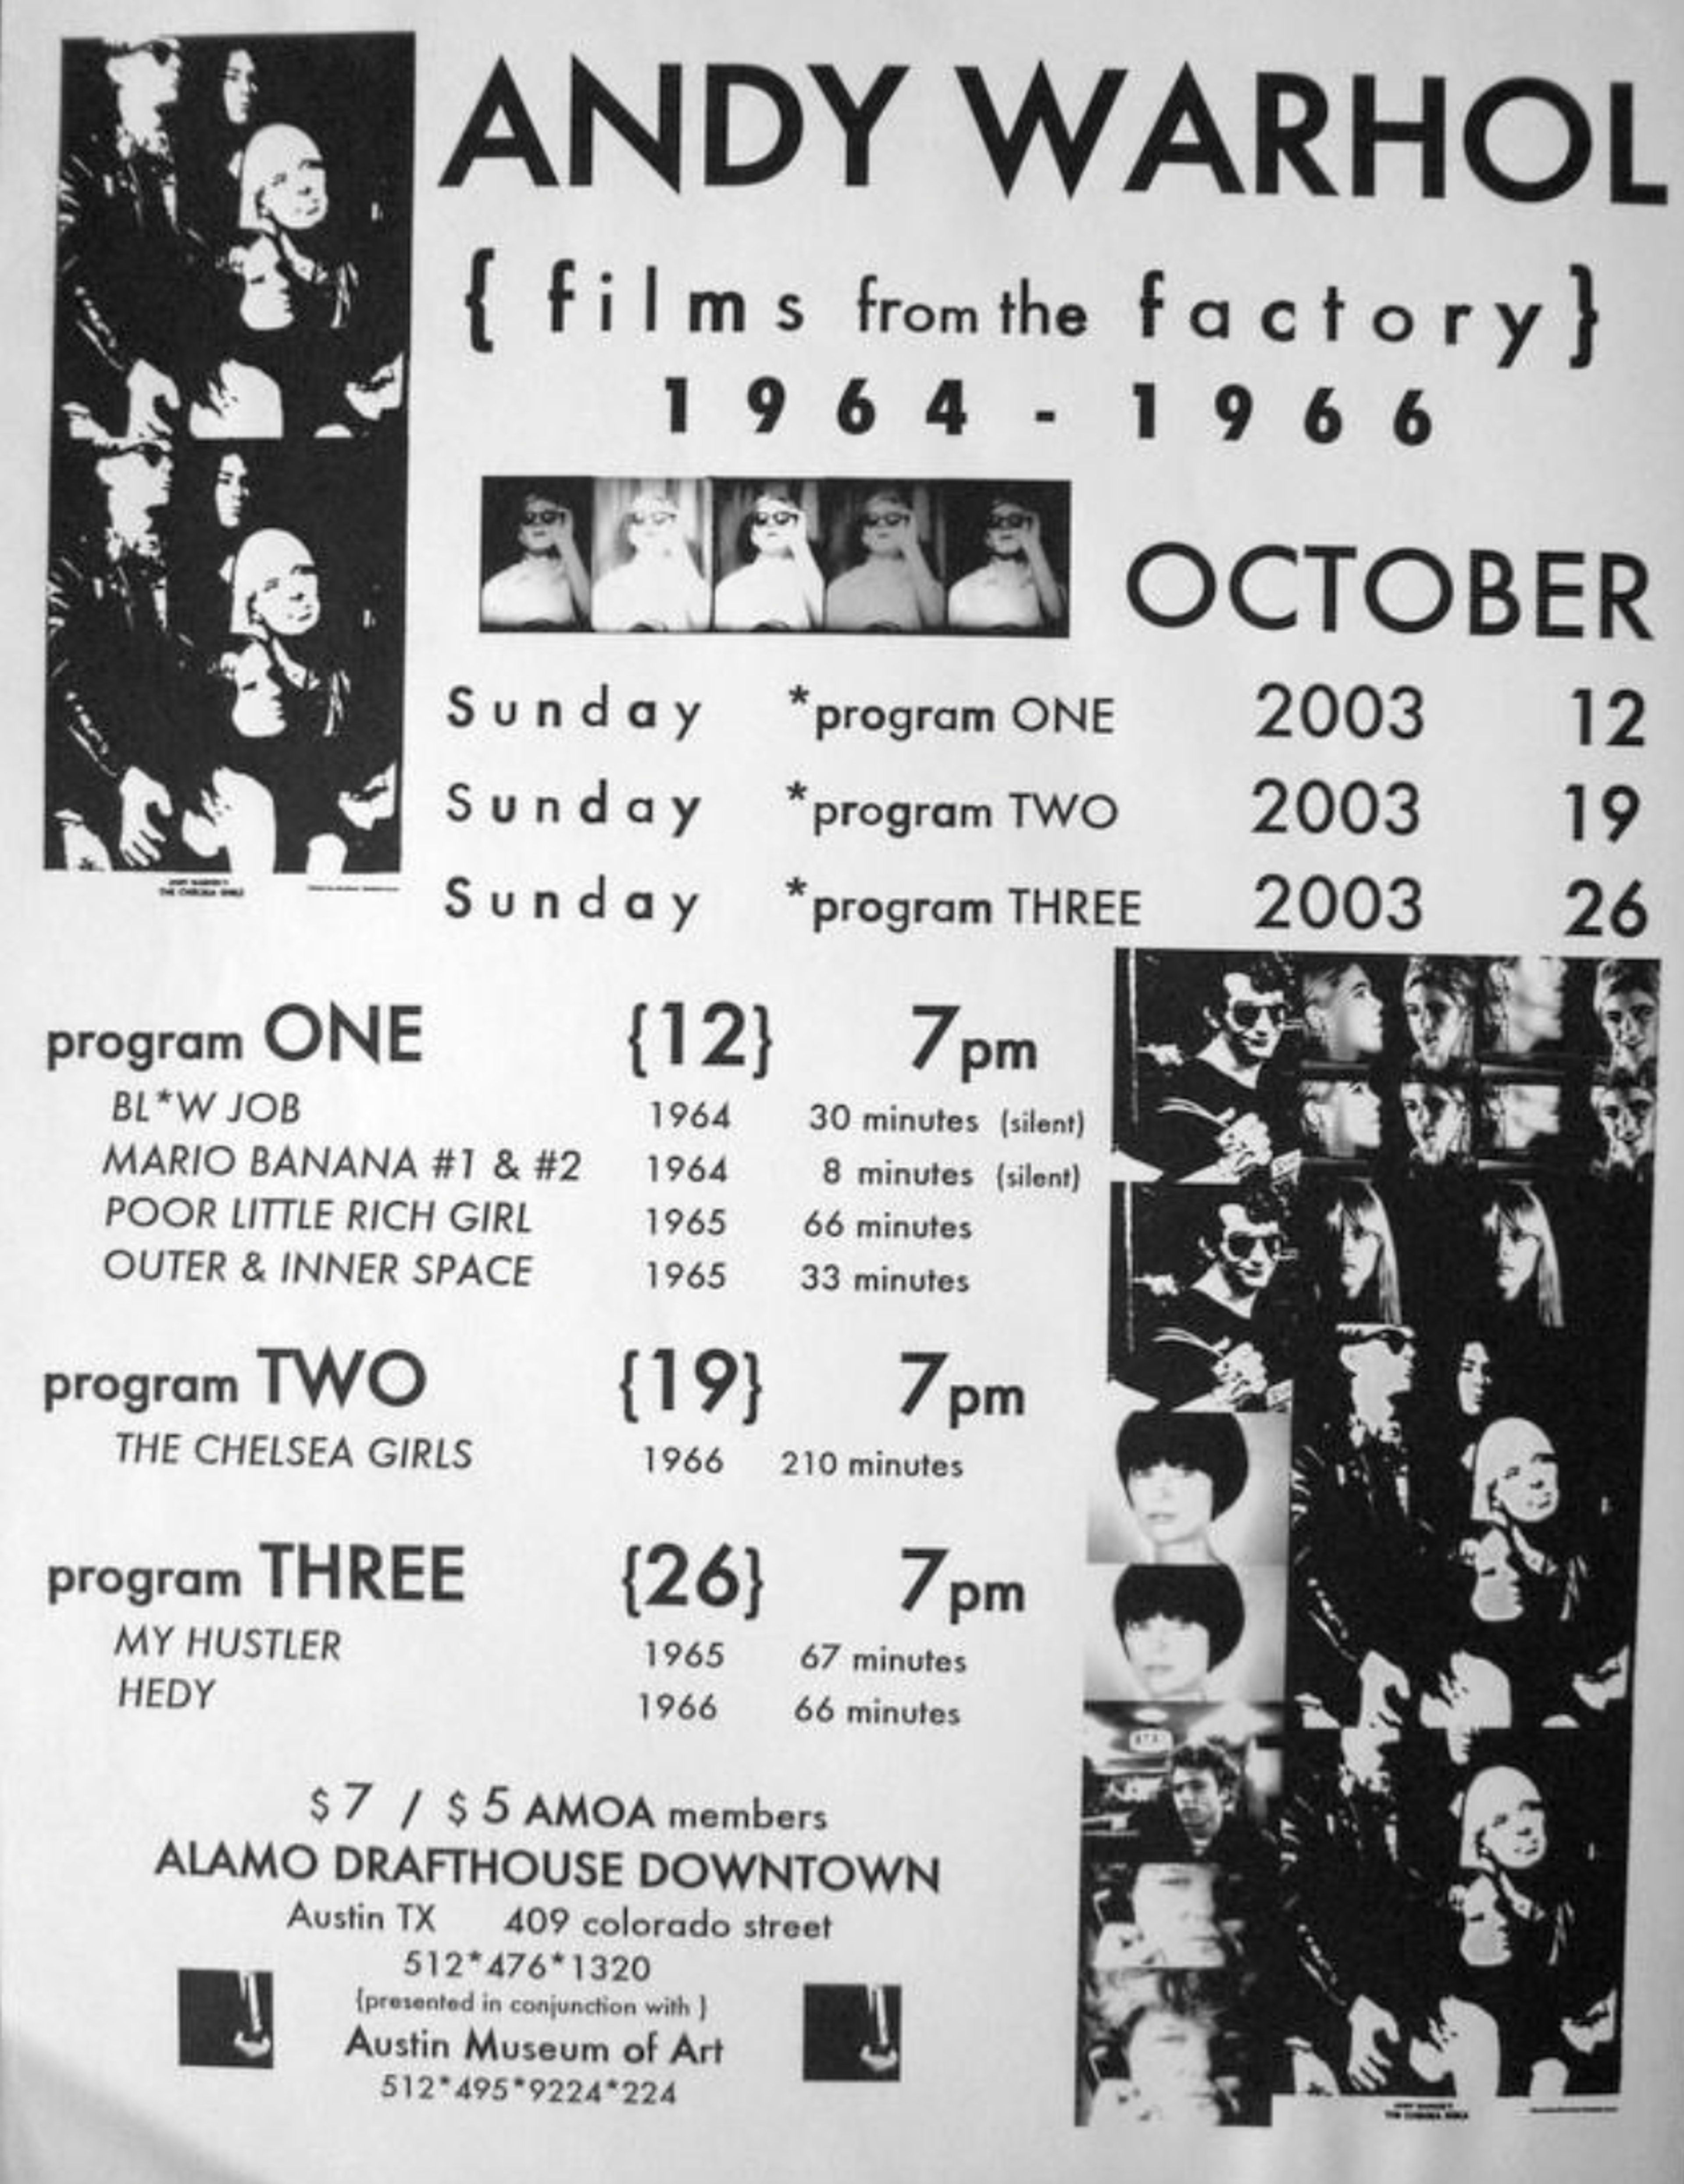 A black and white image of a poster advertising several Andy Warhol films from the factory.